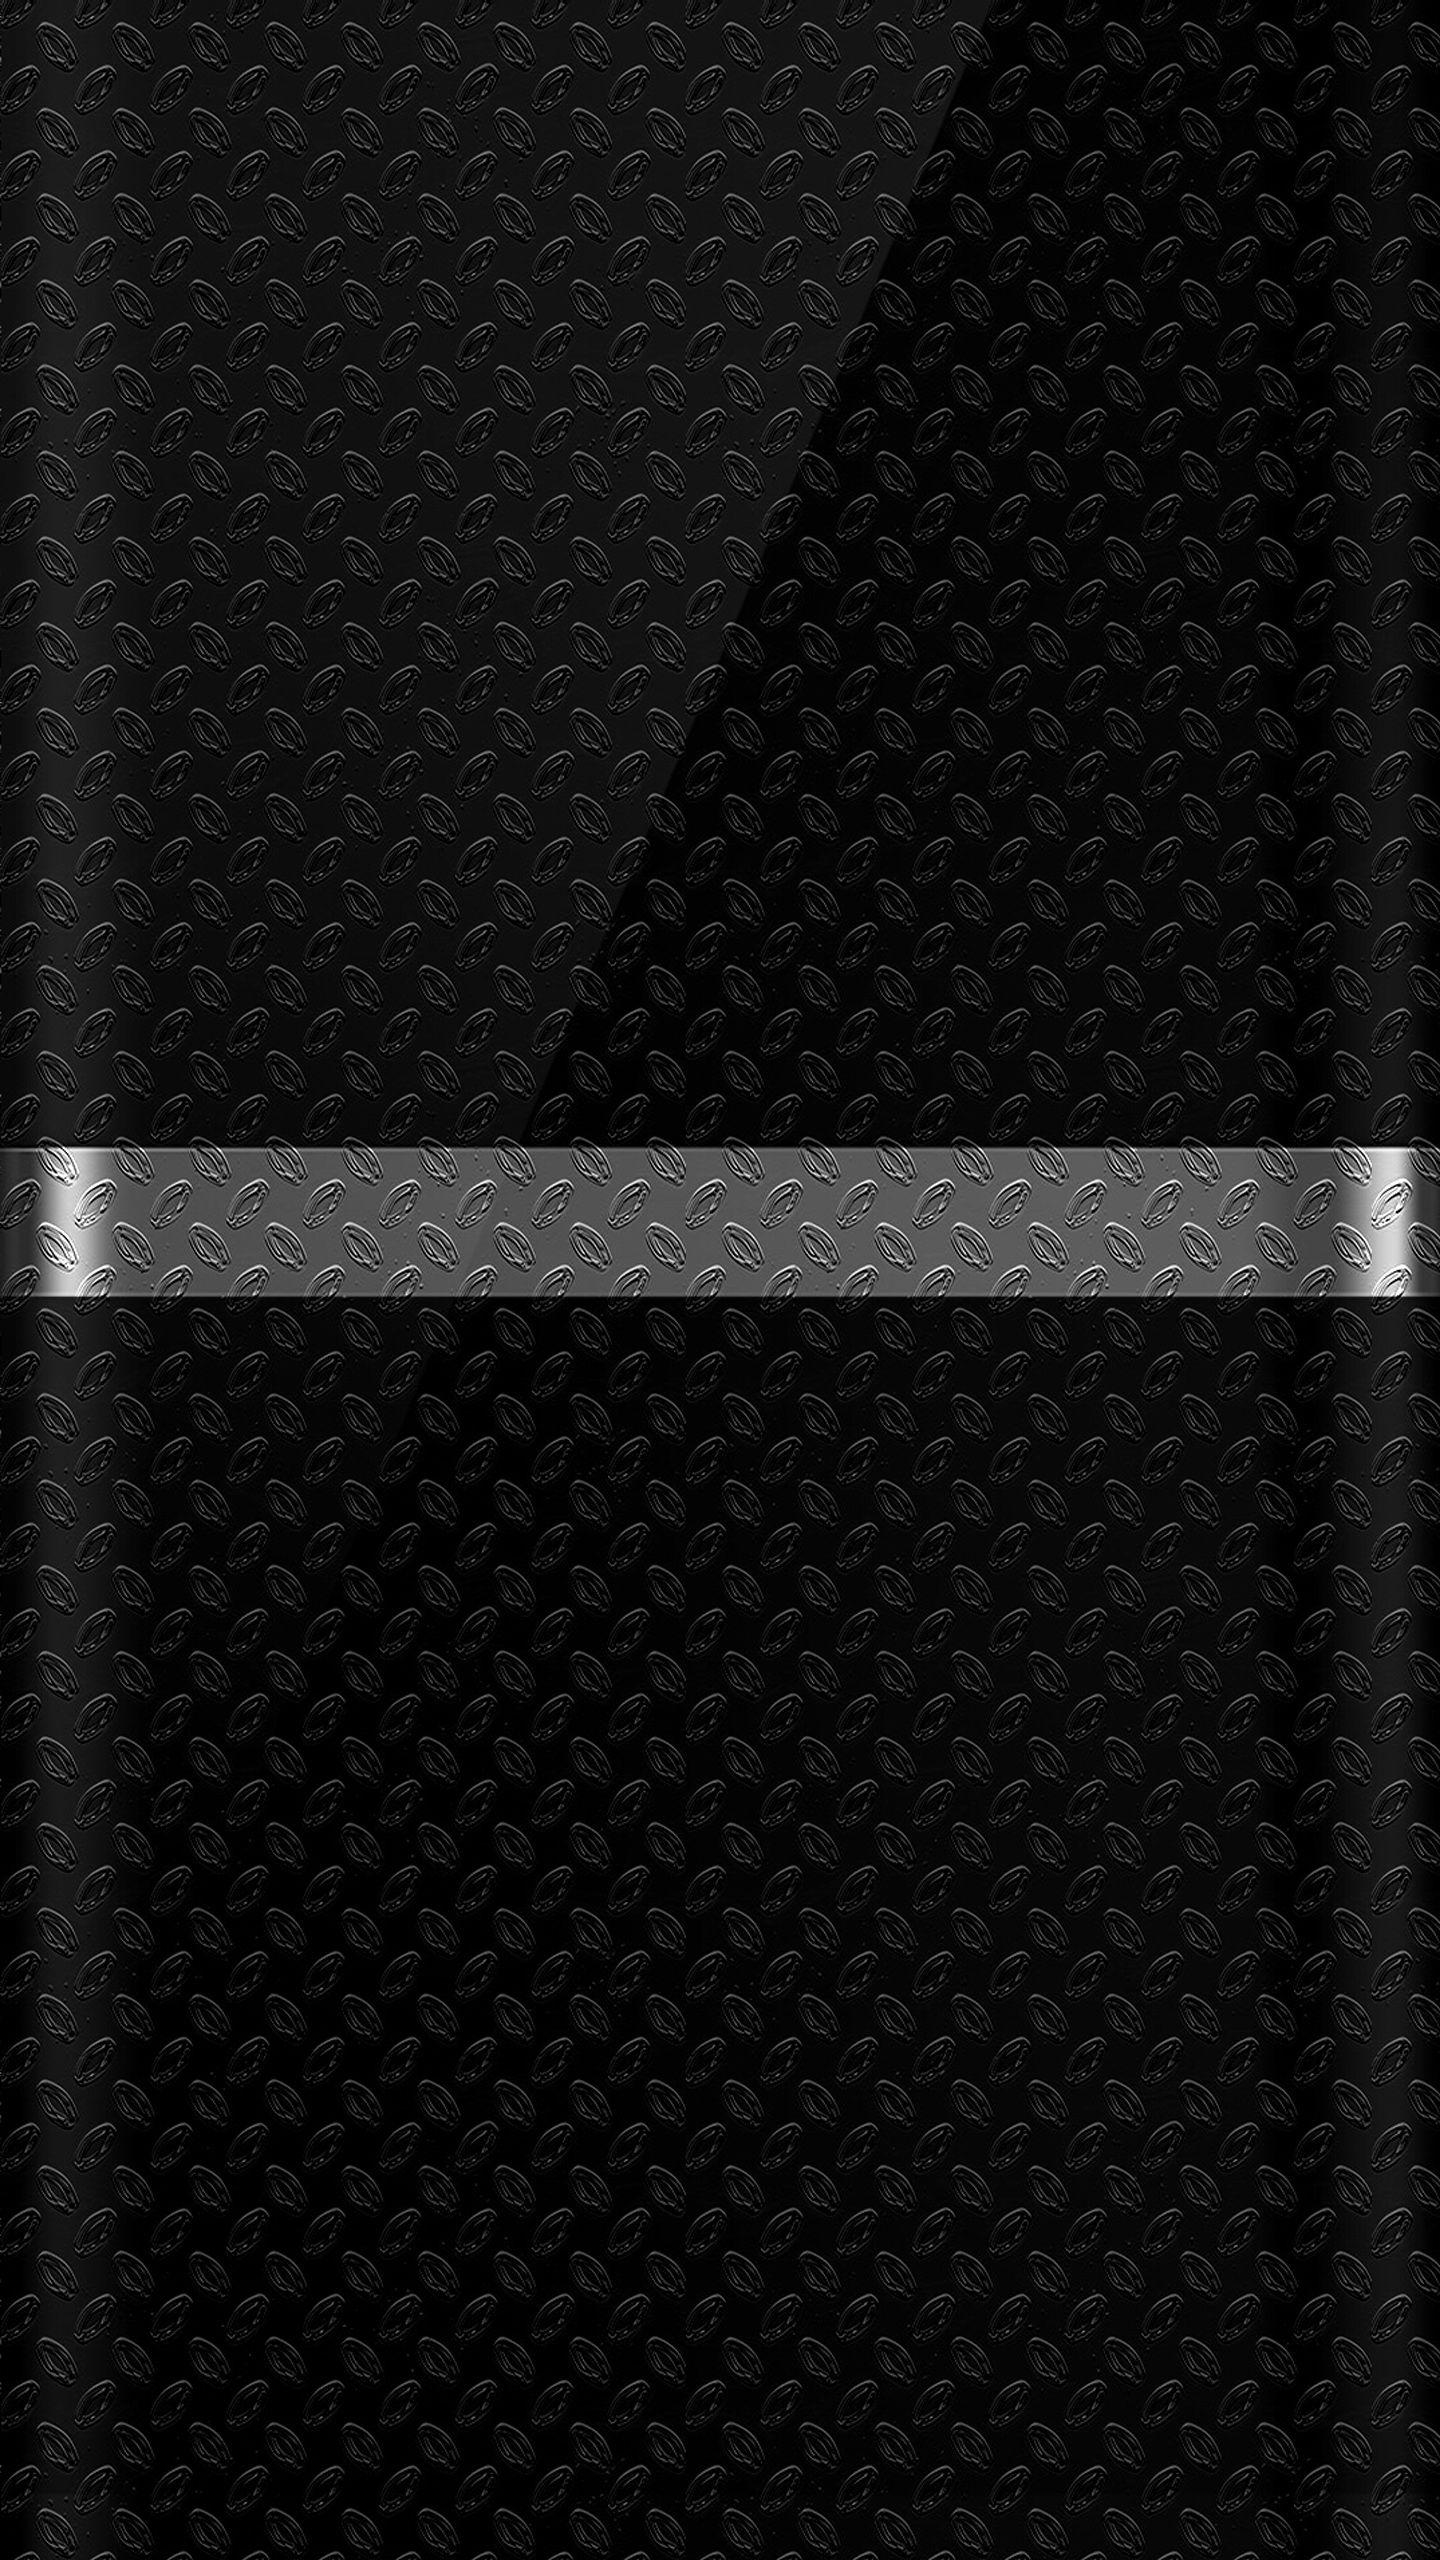 Dark S7 Edge Wallpaper 07 with Black Background and Silver Line